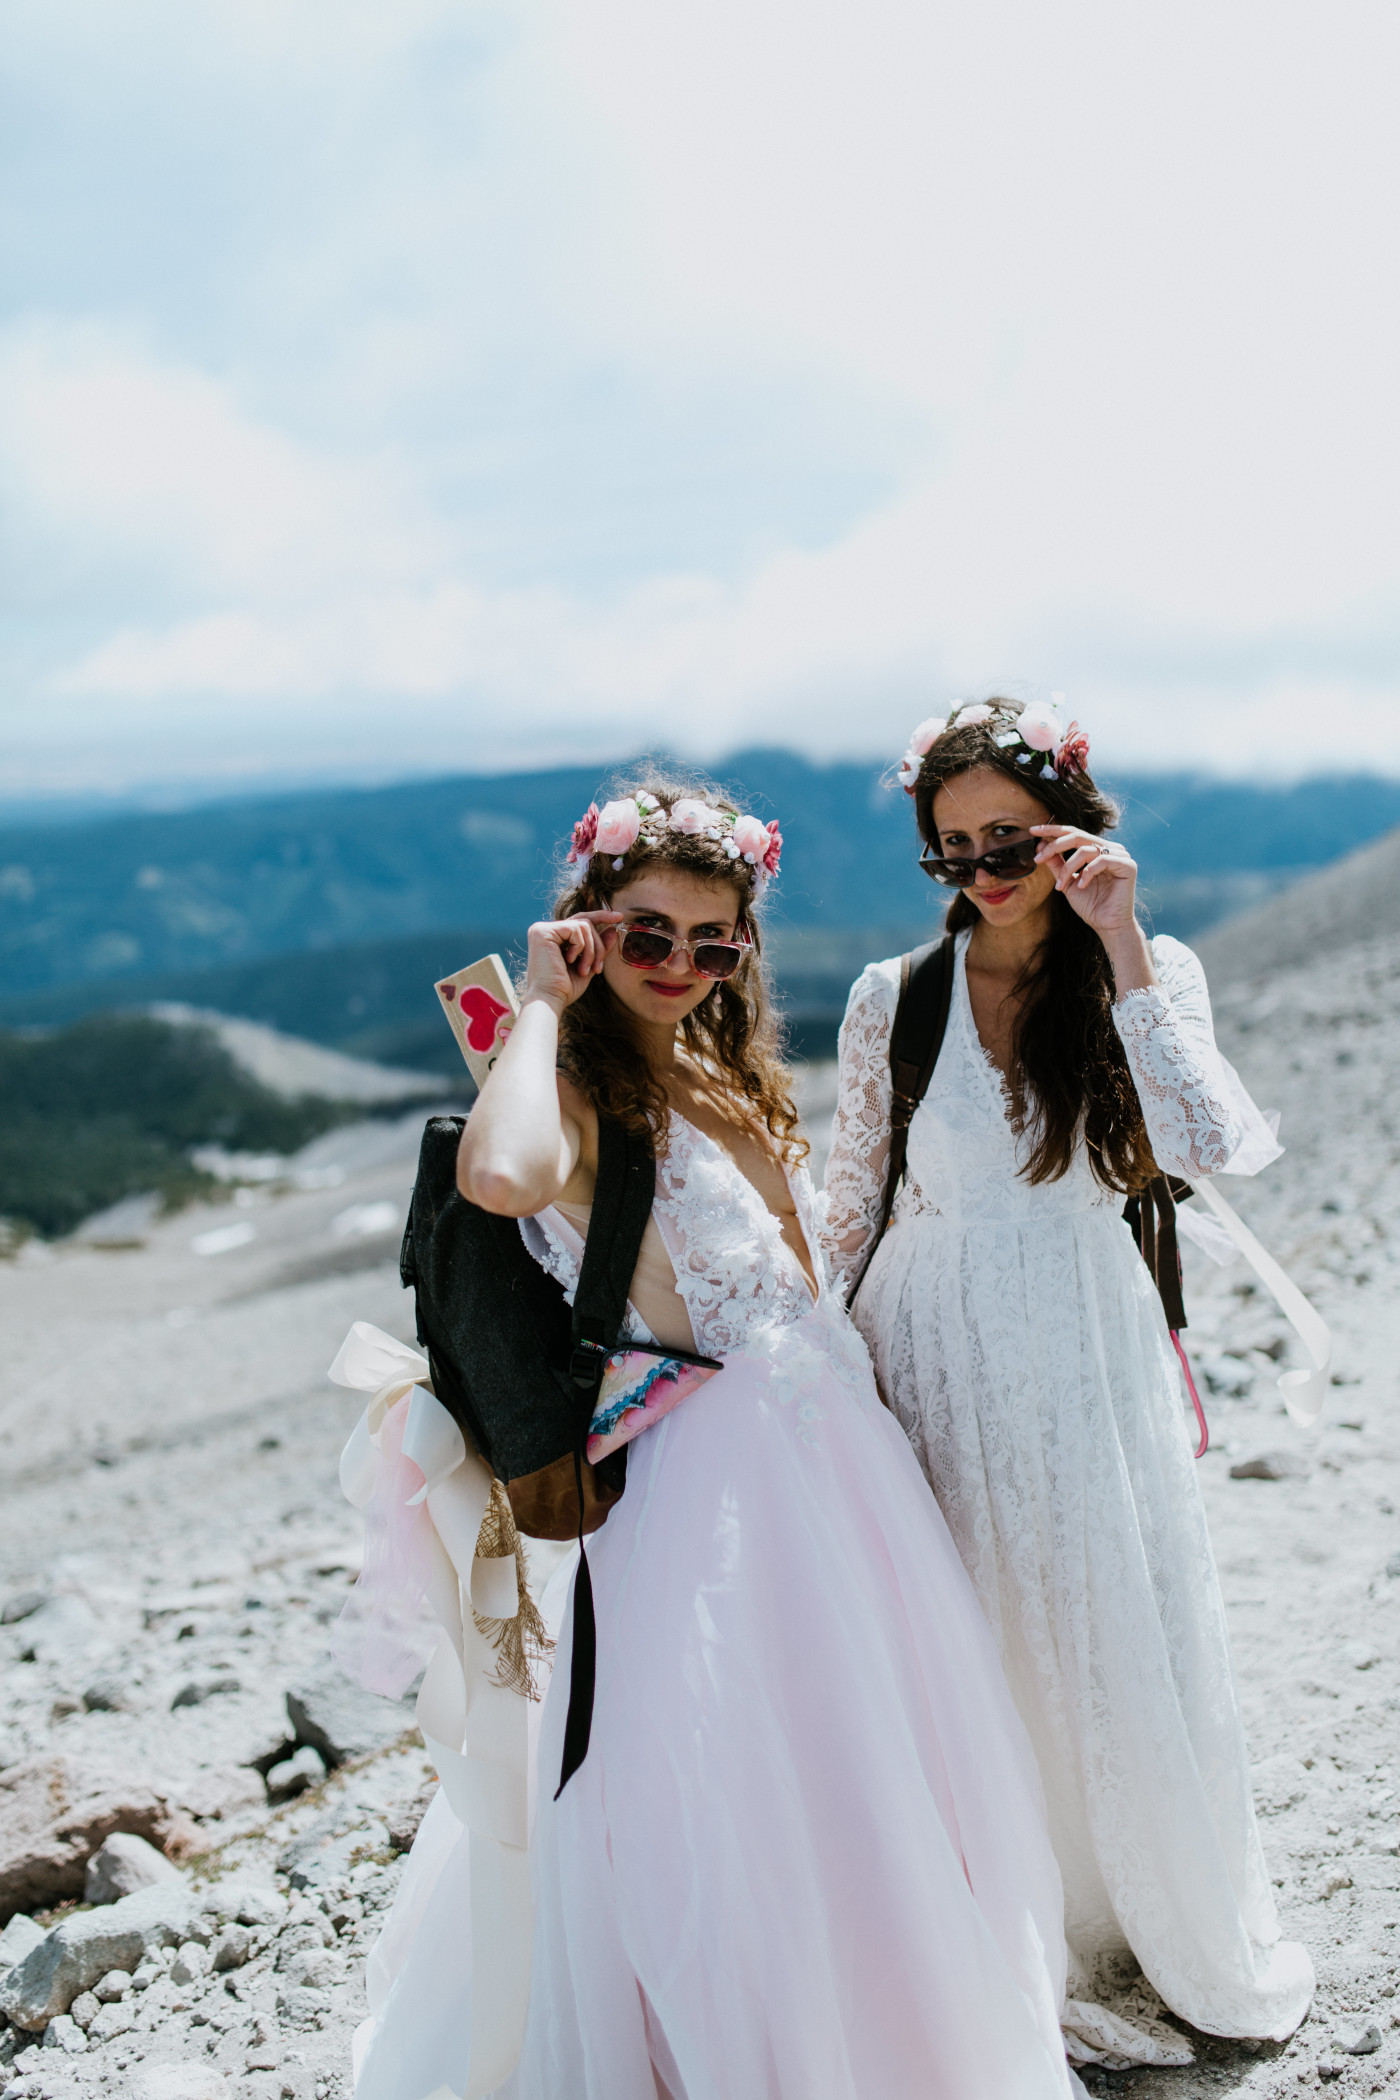 Margaux and Heather put on their sunglasses for the hike down. Elopement photography at Mount Hood by Sienna Plus Josh.